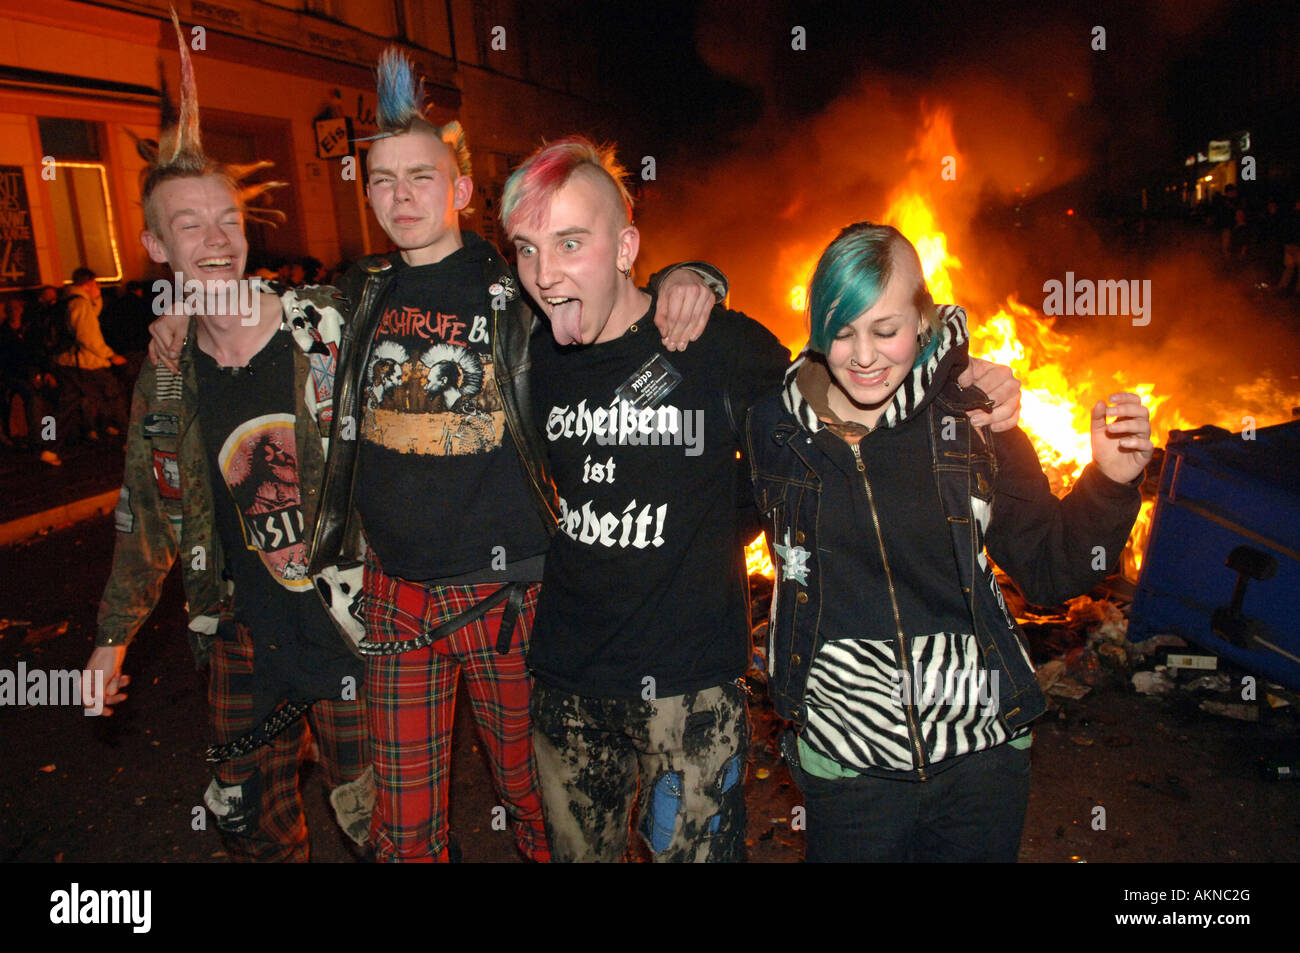 Punks taking part in riots on May 1, Berlin, Germany Stock Photo